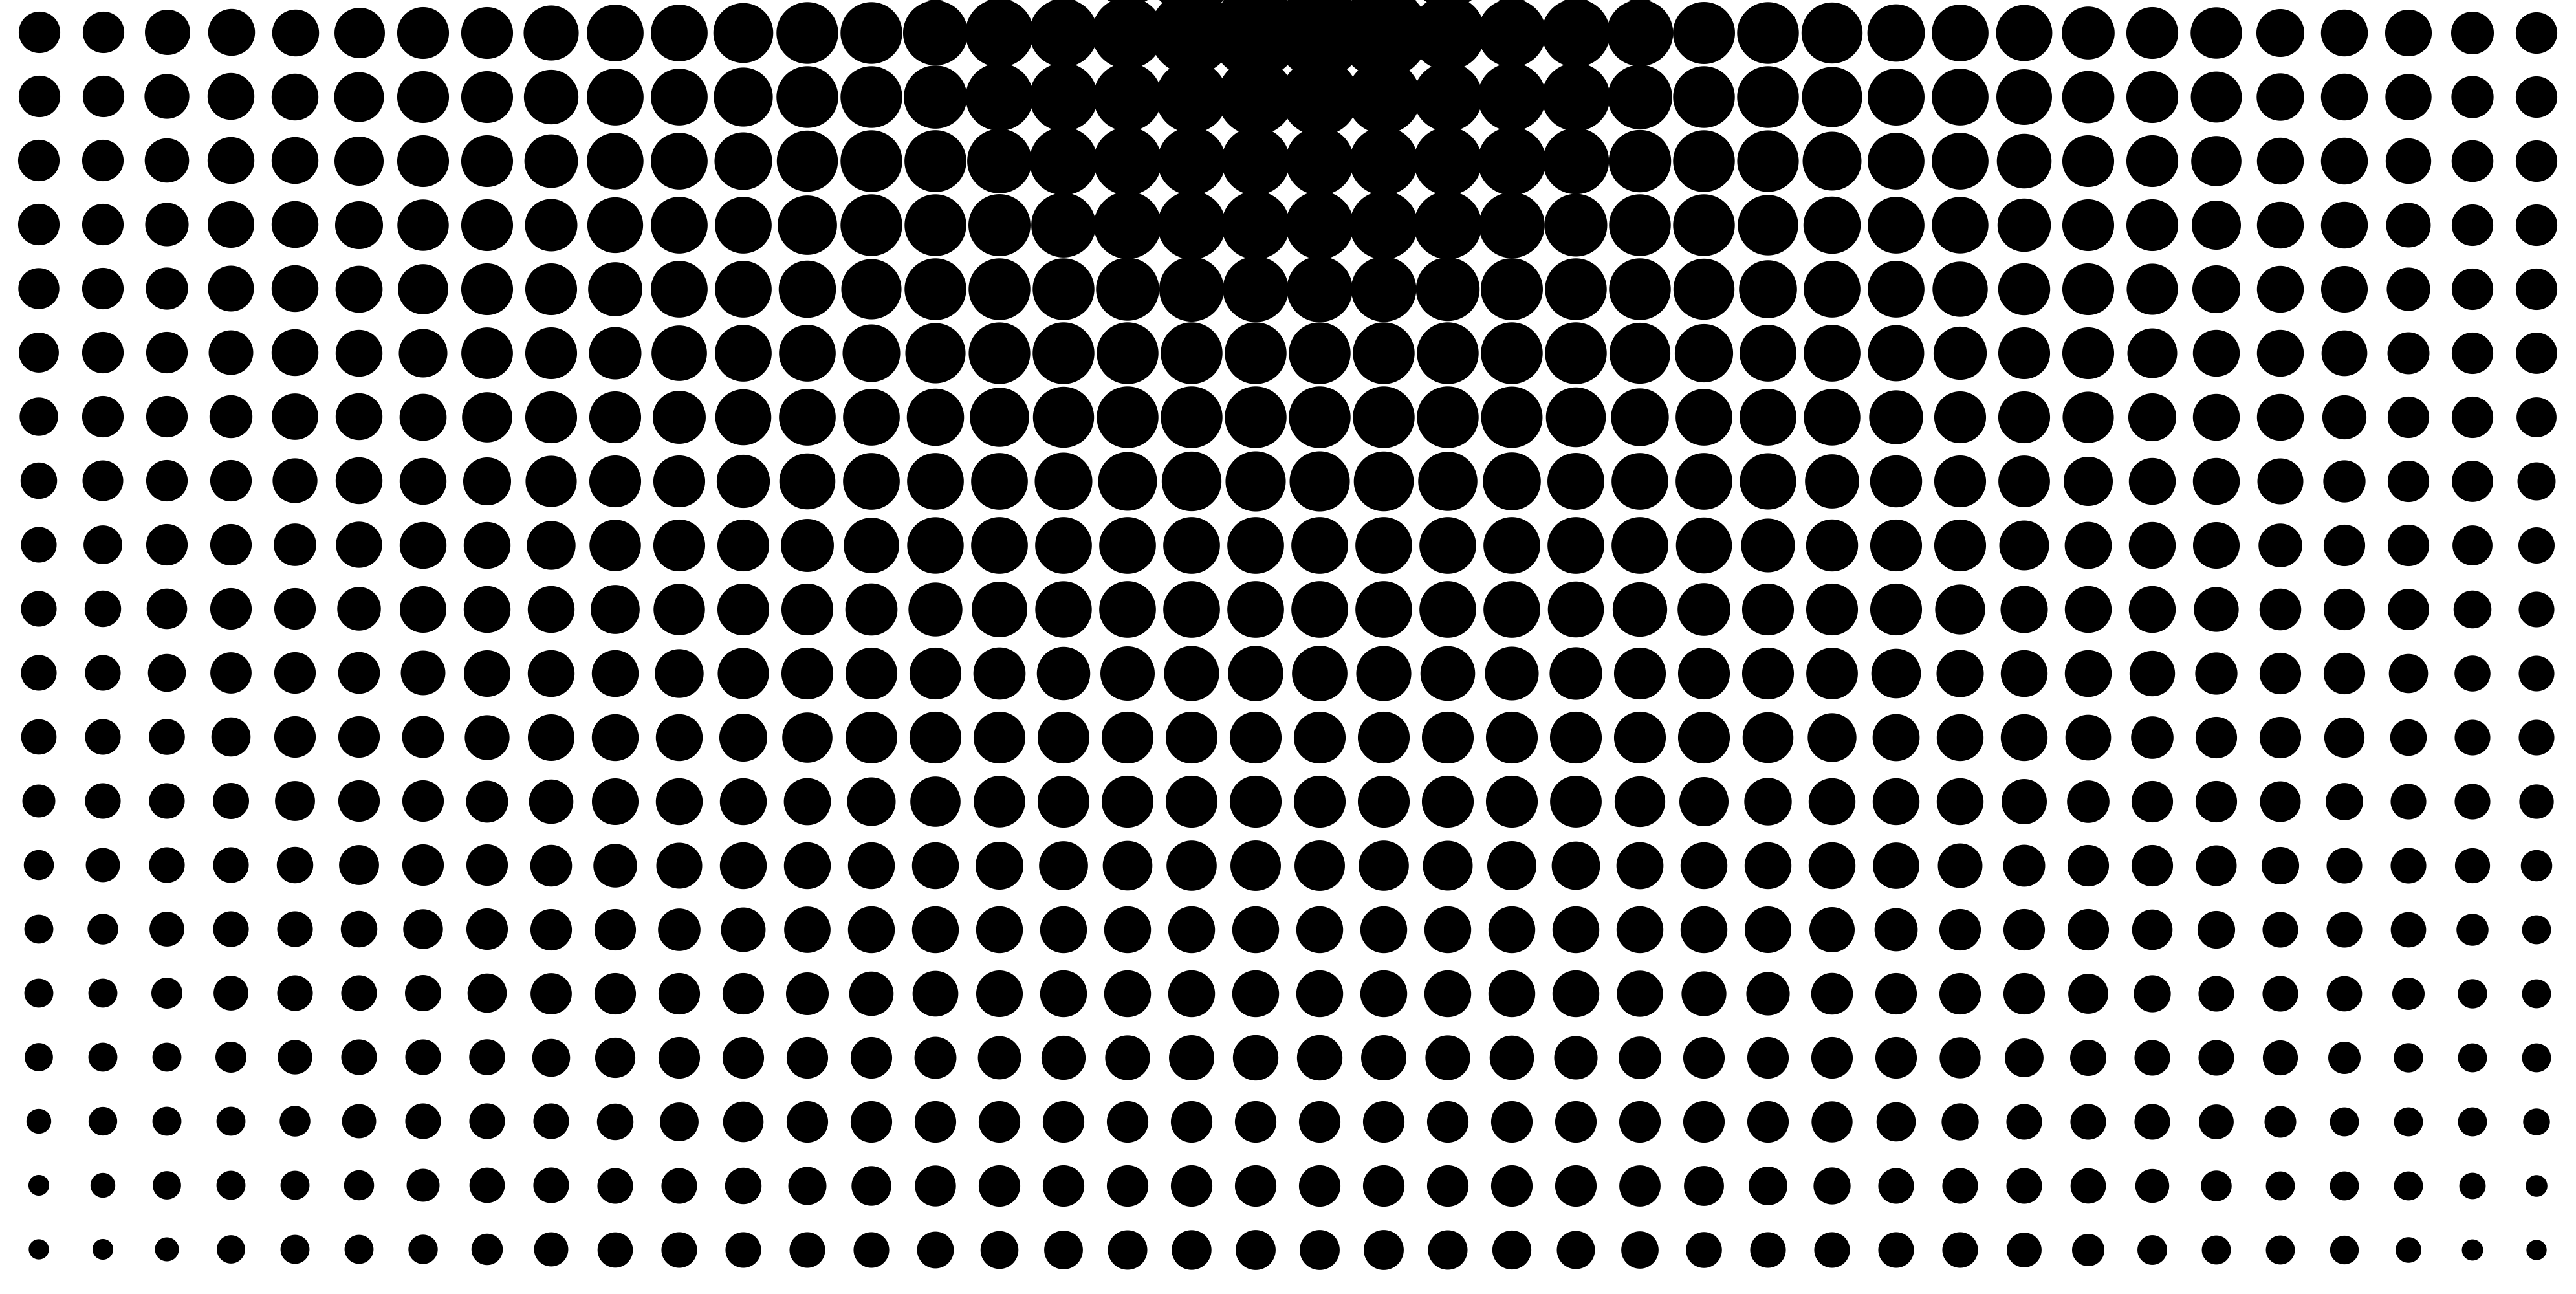 Circular Black and White Halftone Design | Lithography Inspiration ...